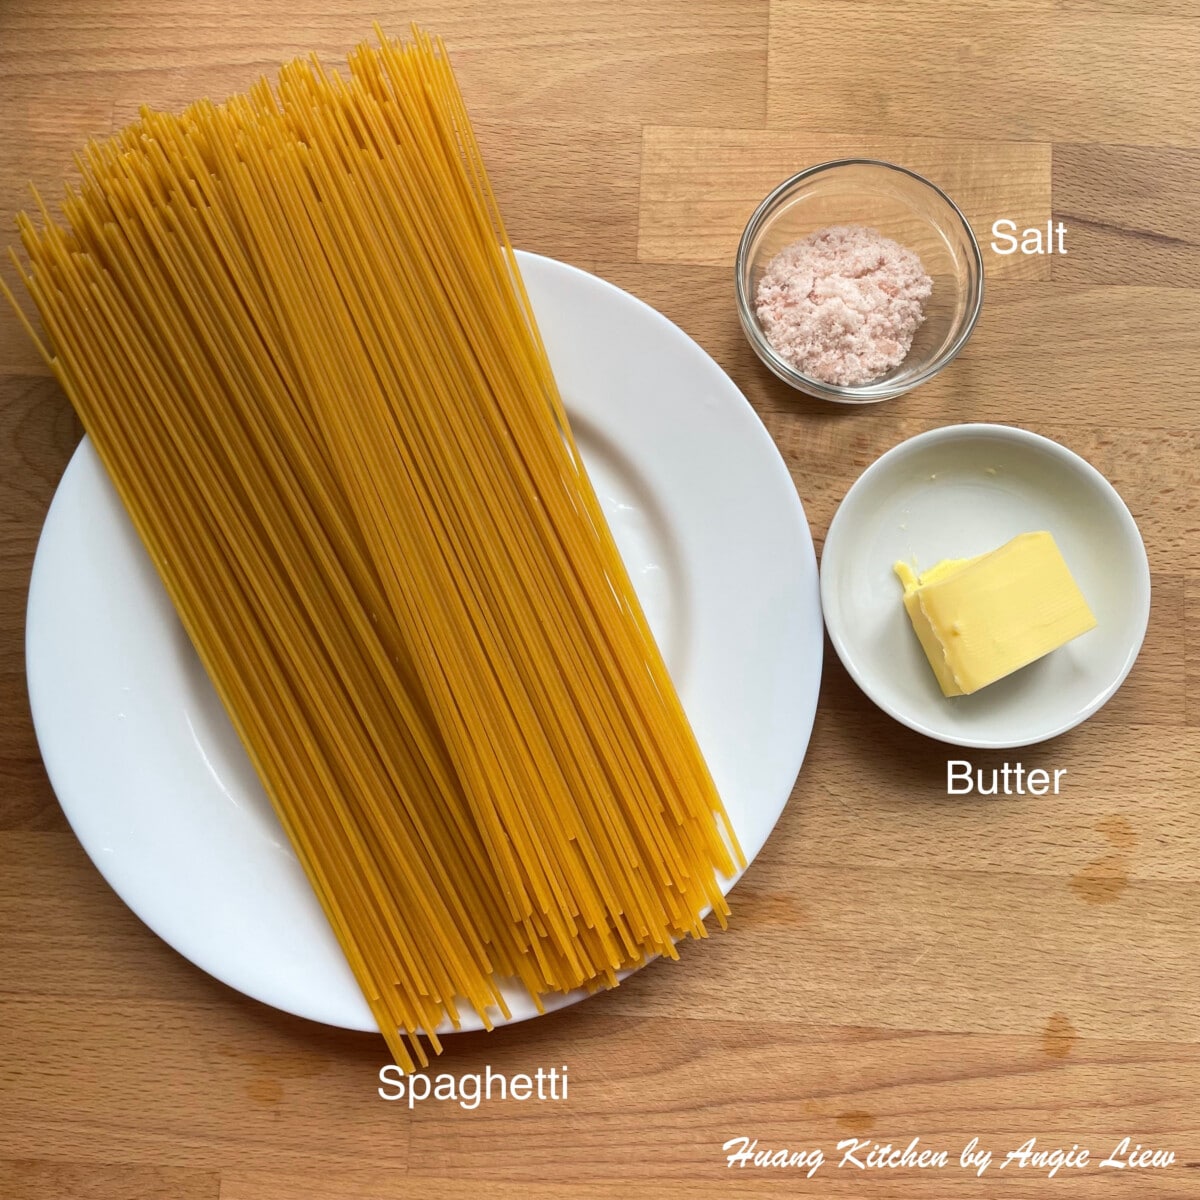 Spaghetti with Curry Meat Sauce (Malaysian Style Bolognese Pasta) Recipe by Huang Kitchen - Ingredients to cook spaghetti